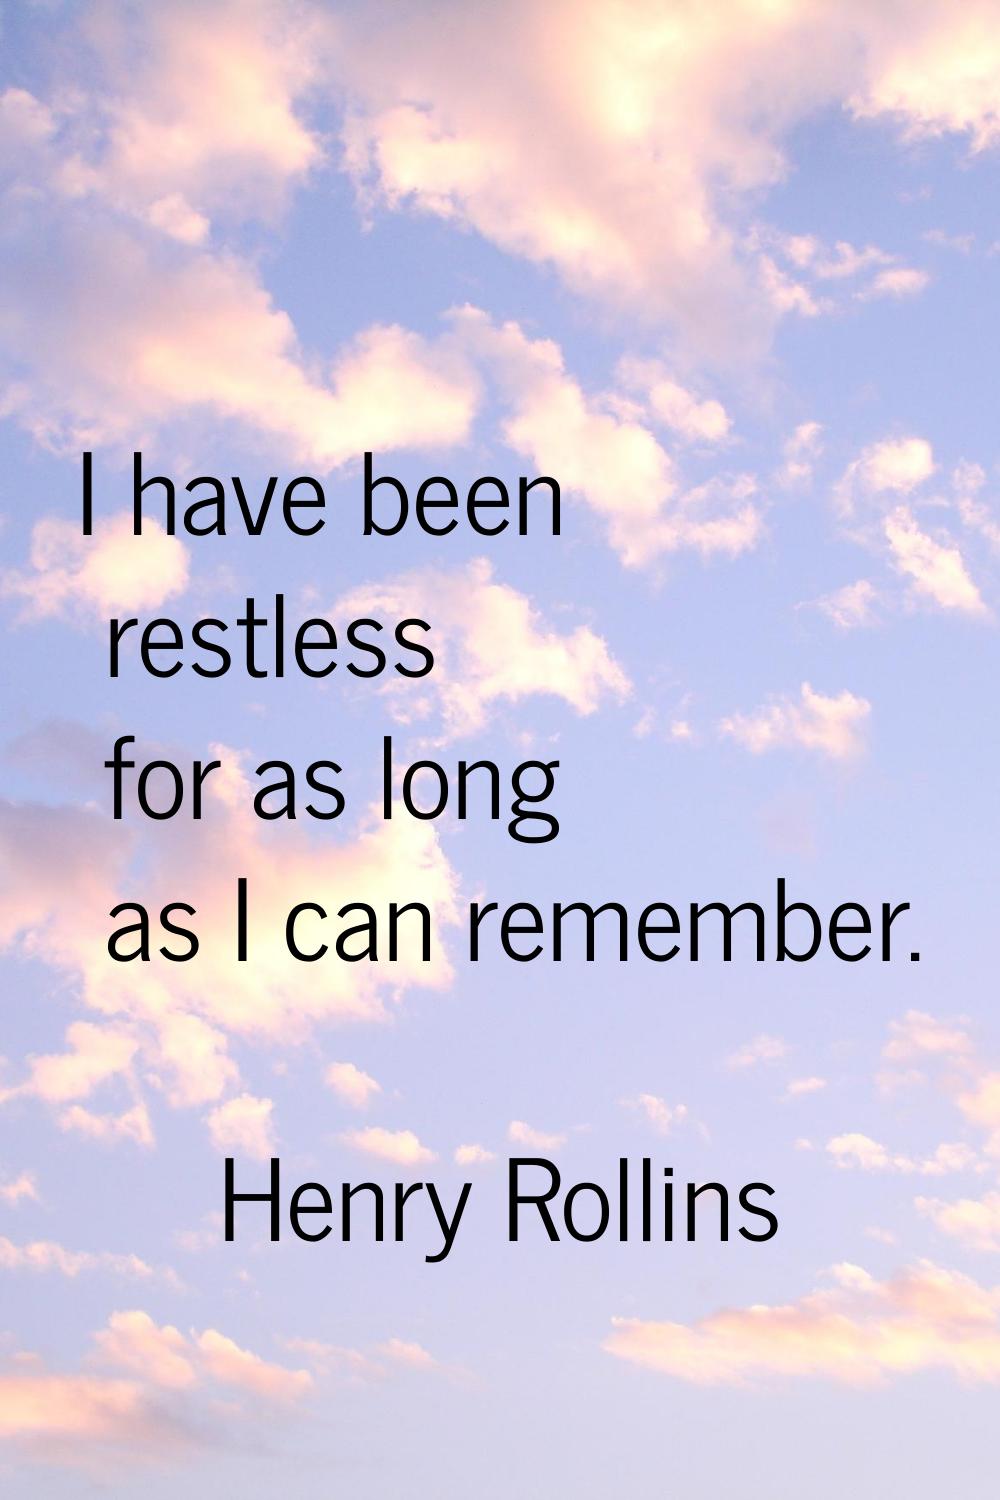 I have been restless for as long as I can remember.